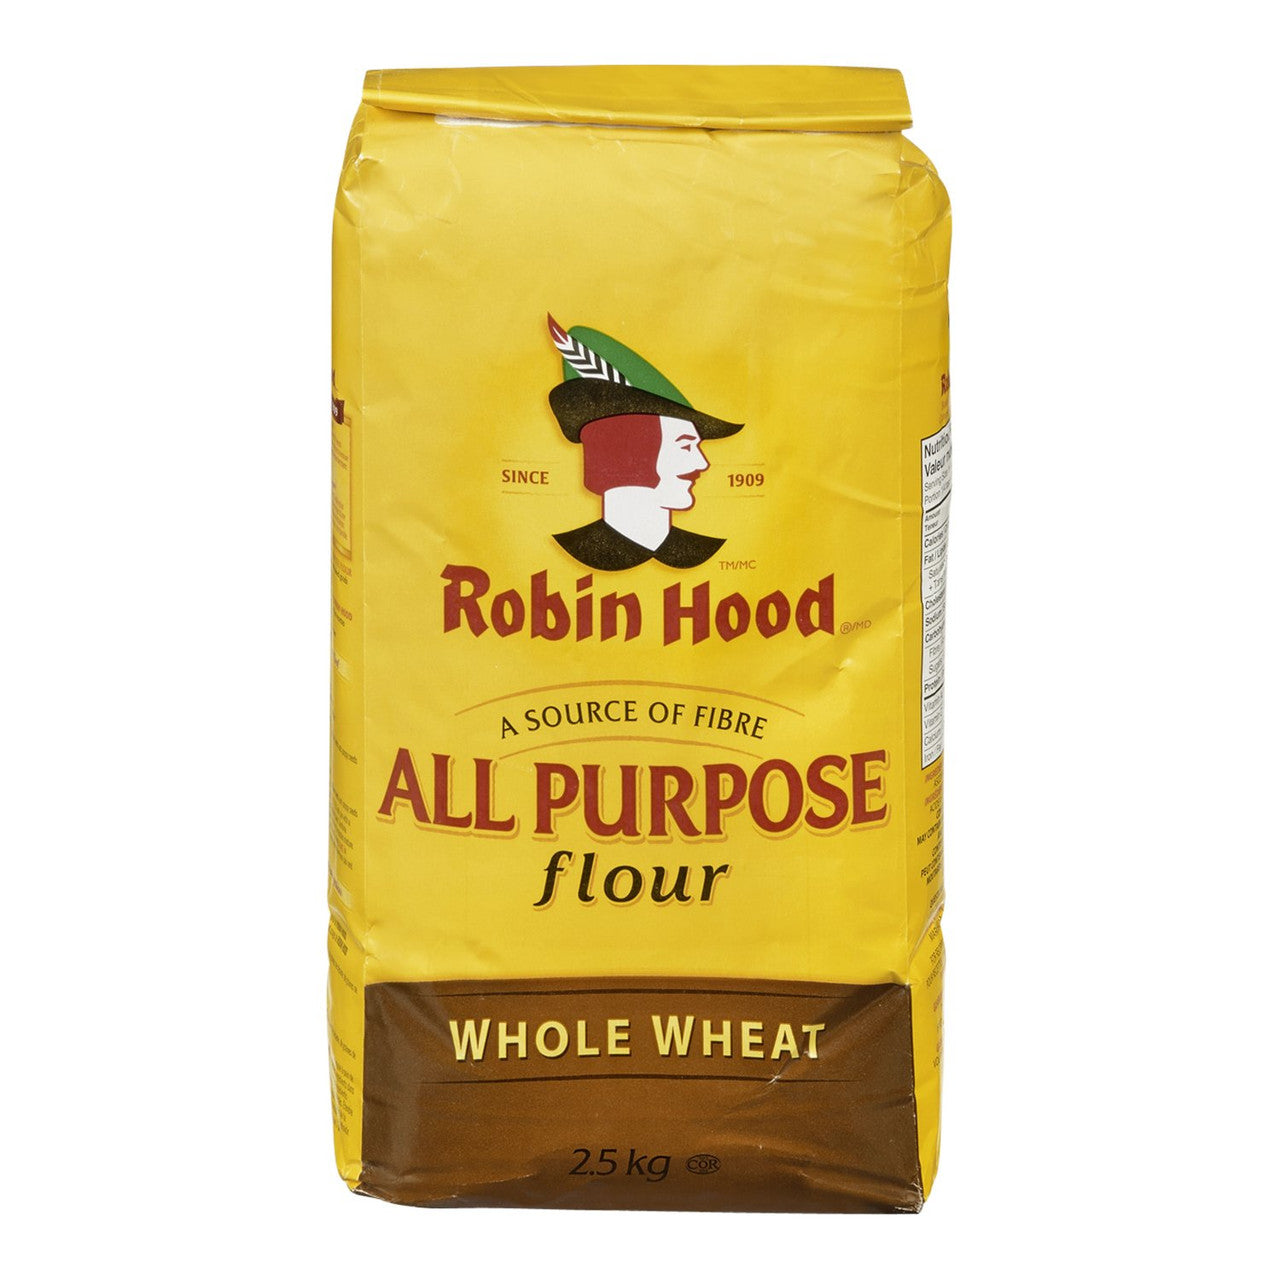 Robin Hood Whole Wheat All Purpose Flour 2.5kg/5.51lbs, (Imported from Canada)